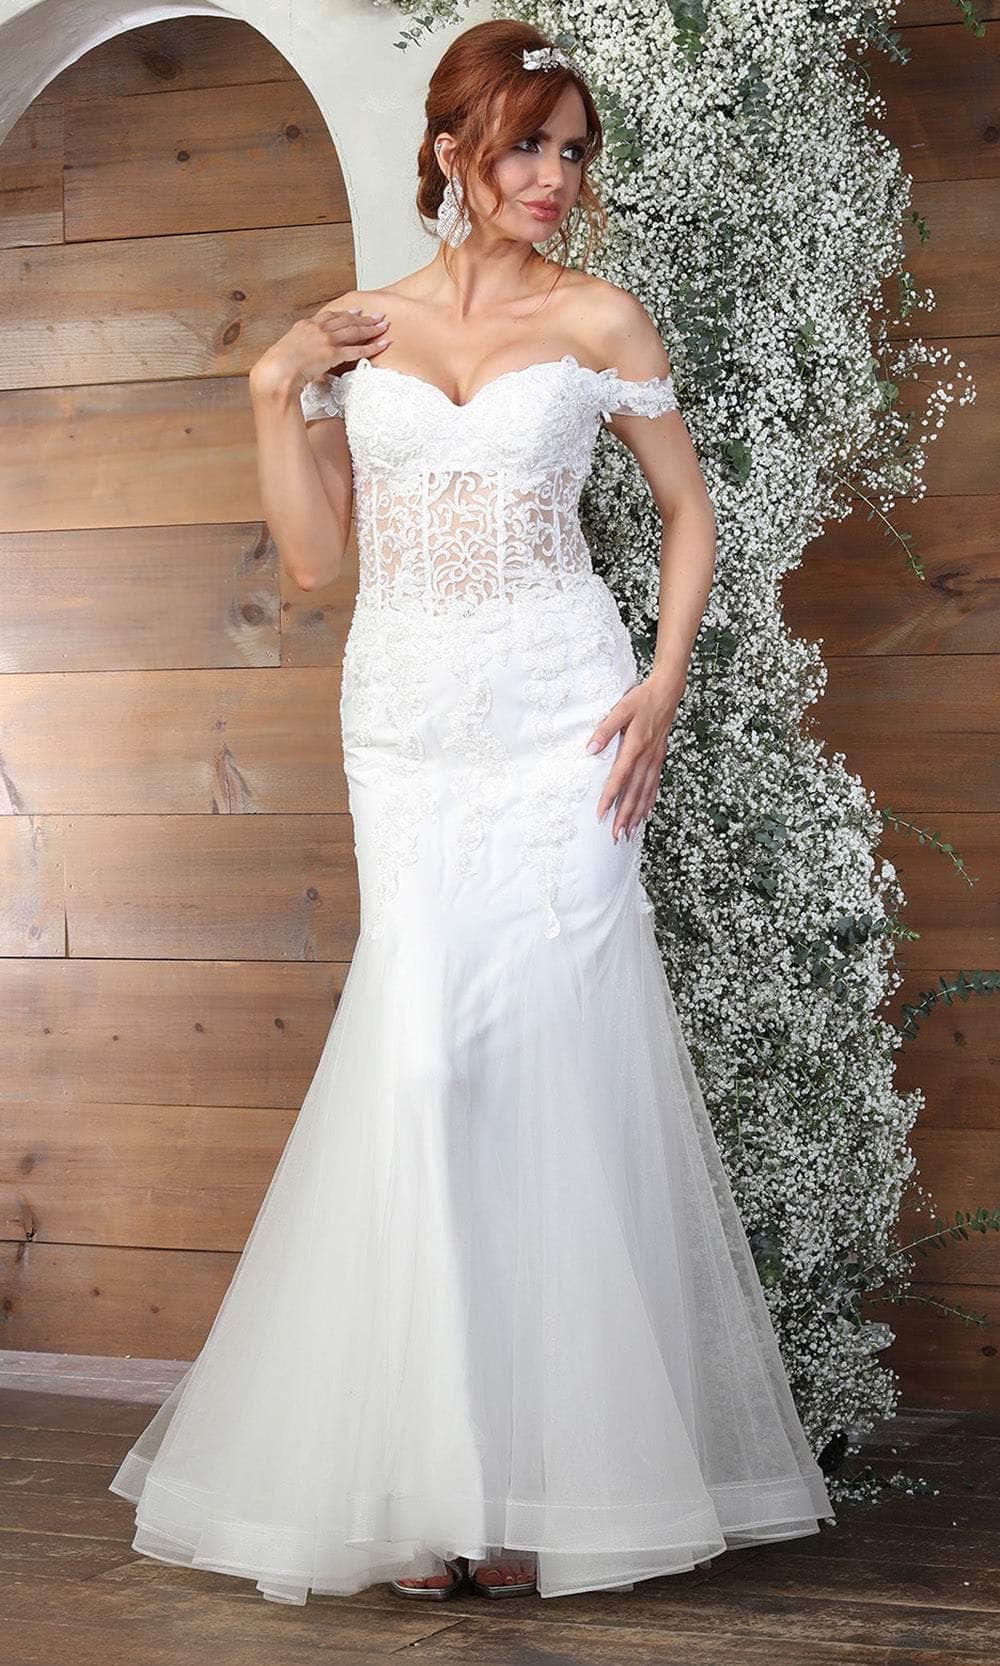 May Queen RQ8086 - Sweetheart Godets Mermaid Evening Gown Wedding Dresses 4 / Ivory